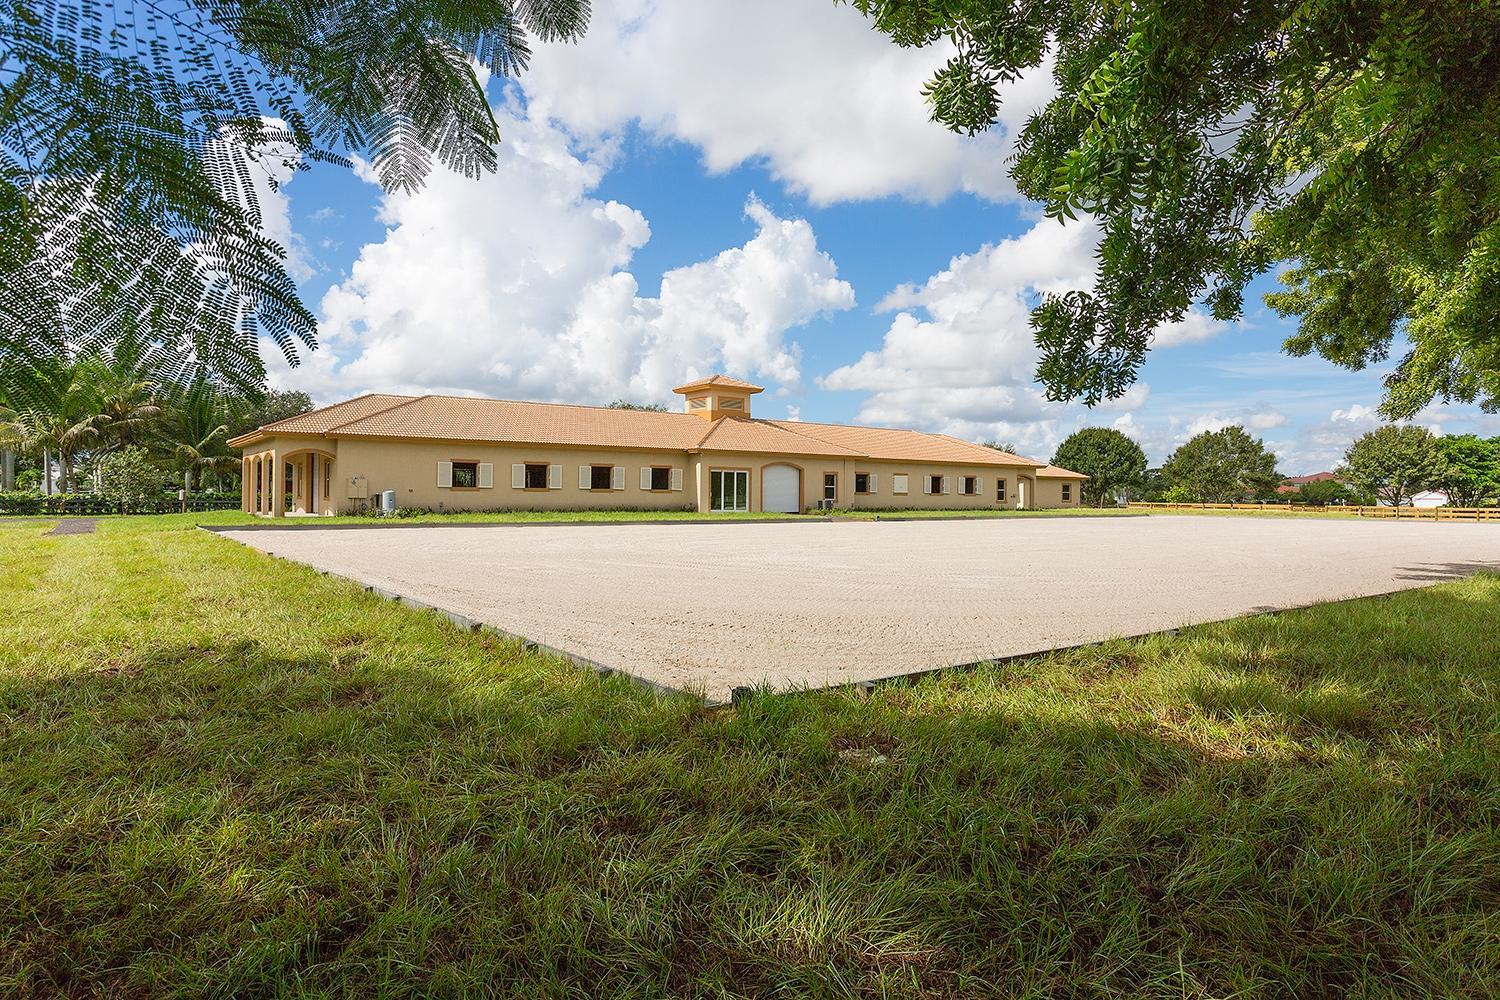 Perfect Saddle Trail 5 acre farm for Season. Short hack to WEF! 5 on suite bedroom, pool home, 16 stall barn and 2 bd guest cottage on the trail,. Barn and cottage also available without home $175,000.  Tour this fabulous farm for next season!